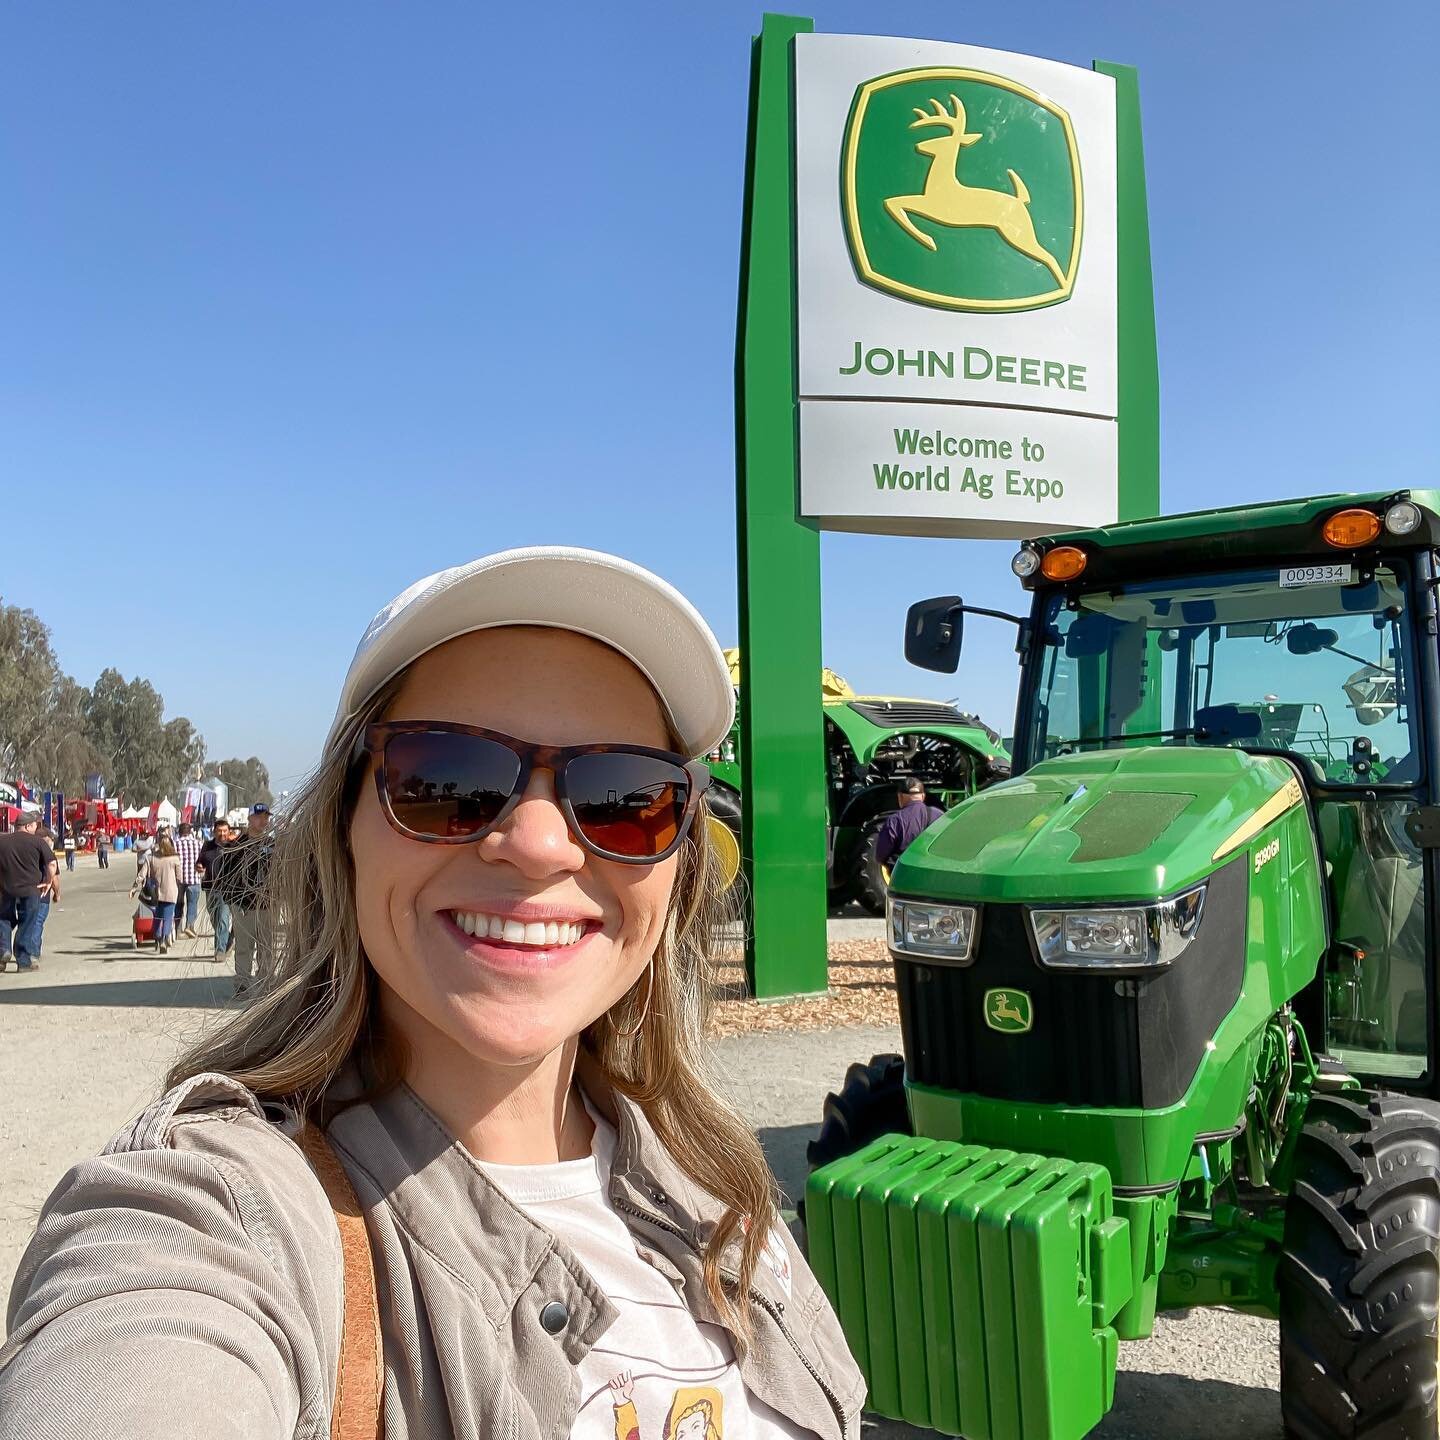 13,000+ steps and a belly full of fresh, dutch oven peach cobbler later, my heart is full after a full day spent at the @worldagexpo with my dad and brothers!

It&rsquo;s been a family tradition as long as I can remember to spend a day at the farm sh